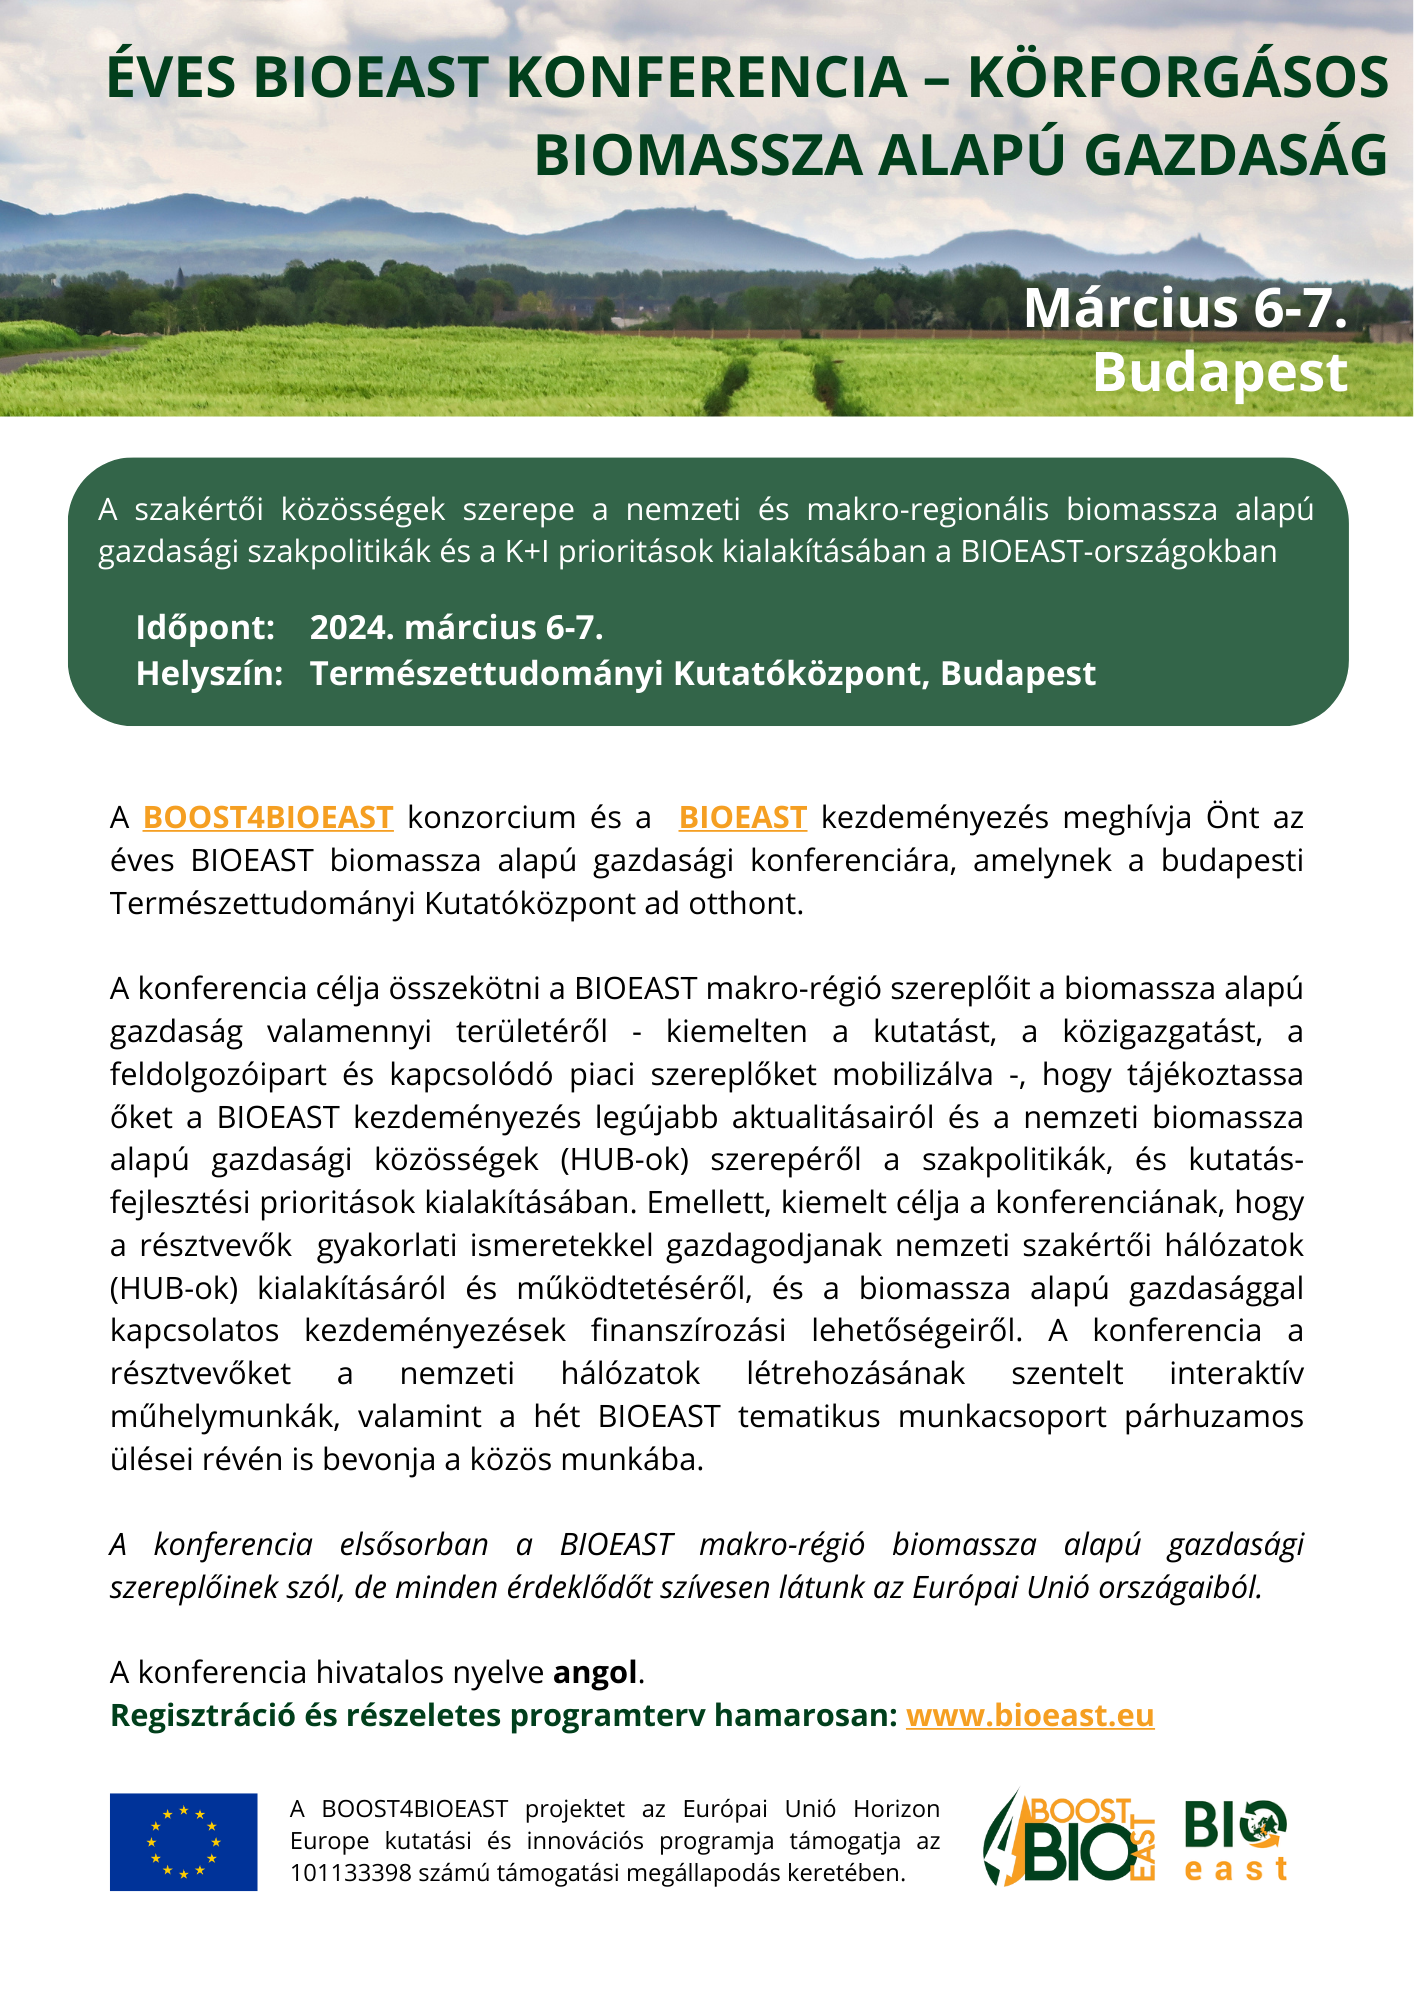 The BOOST4BIOEAST consortium and the BIOEAST Initiative jointly invite you to the Annual BIOEAST Bioeconomy Conference hosted by the Research Centre for Natural Sciences in Budapest, Hungary. The  (4)